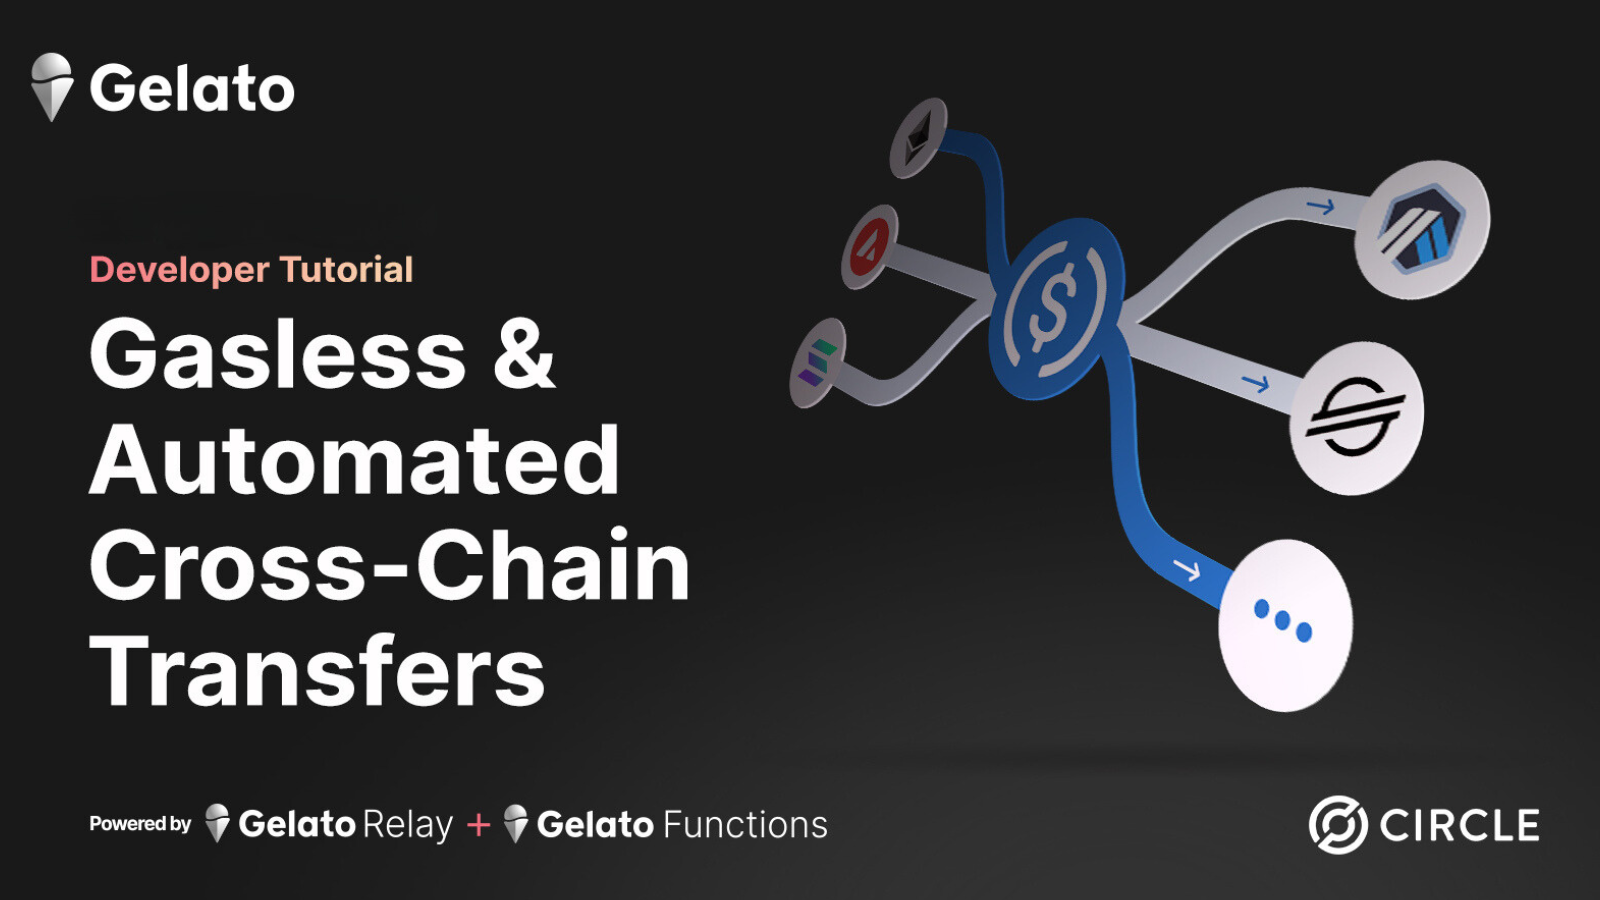 Gasless & Automated Cross-Chain Transfers Powered by Gelato